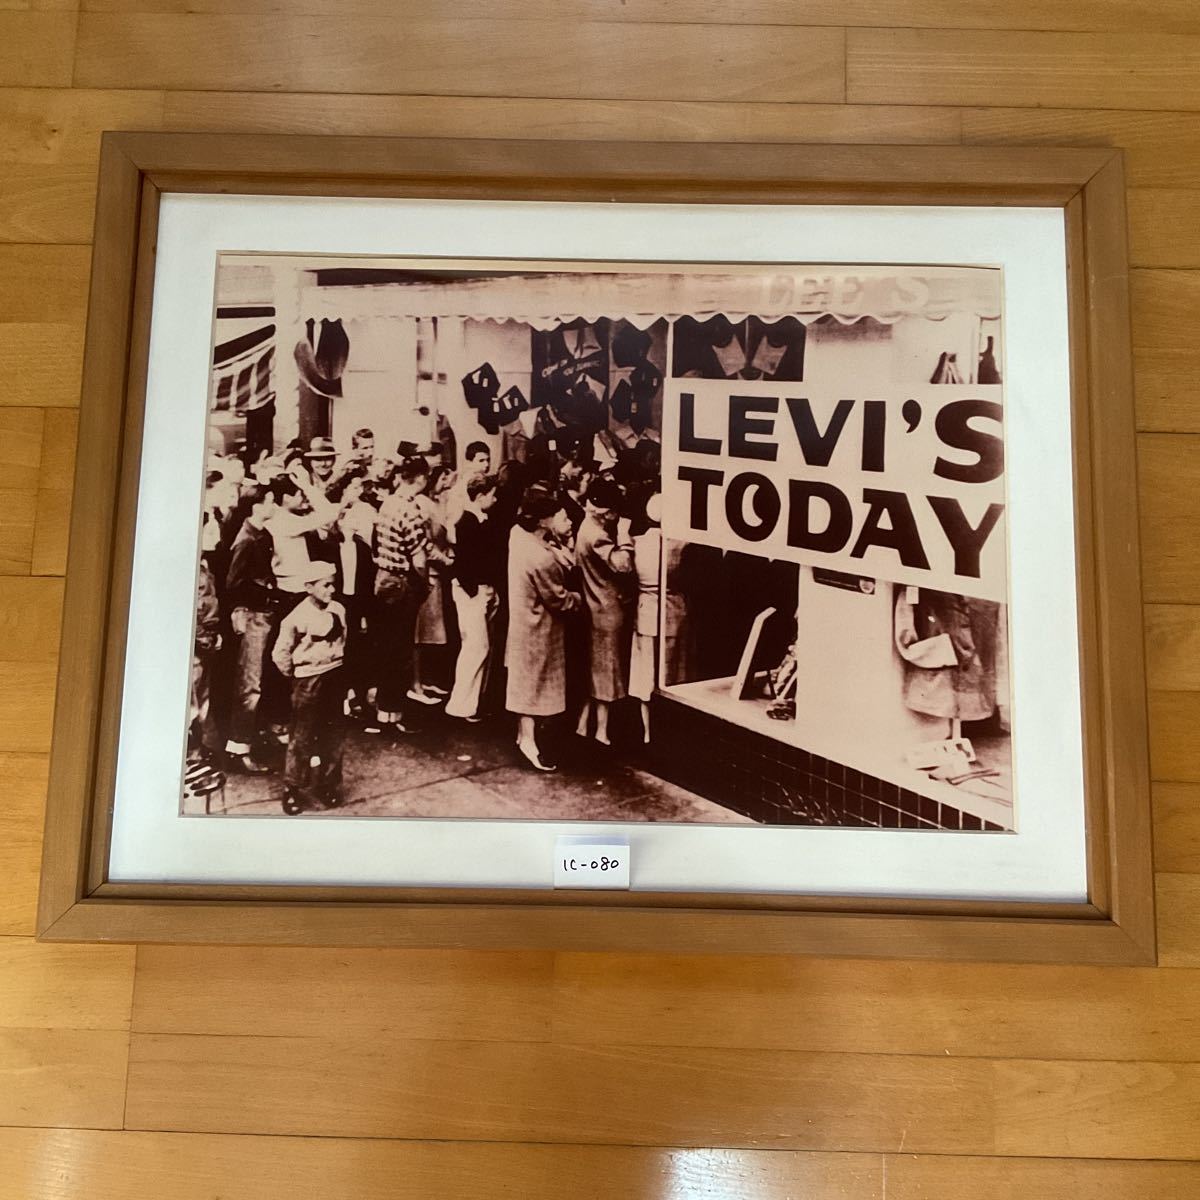 ★Levi's★LEVI's★LEVI'sTODAY★Large photo★Storeroom release★1C-080★BigE★501★Denim★Jeans★Not for sale★, antique, collection, Printed materials, others